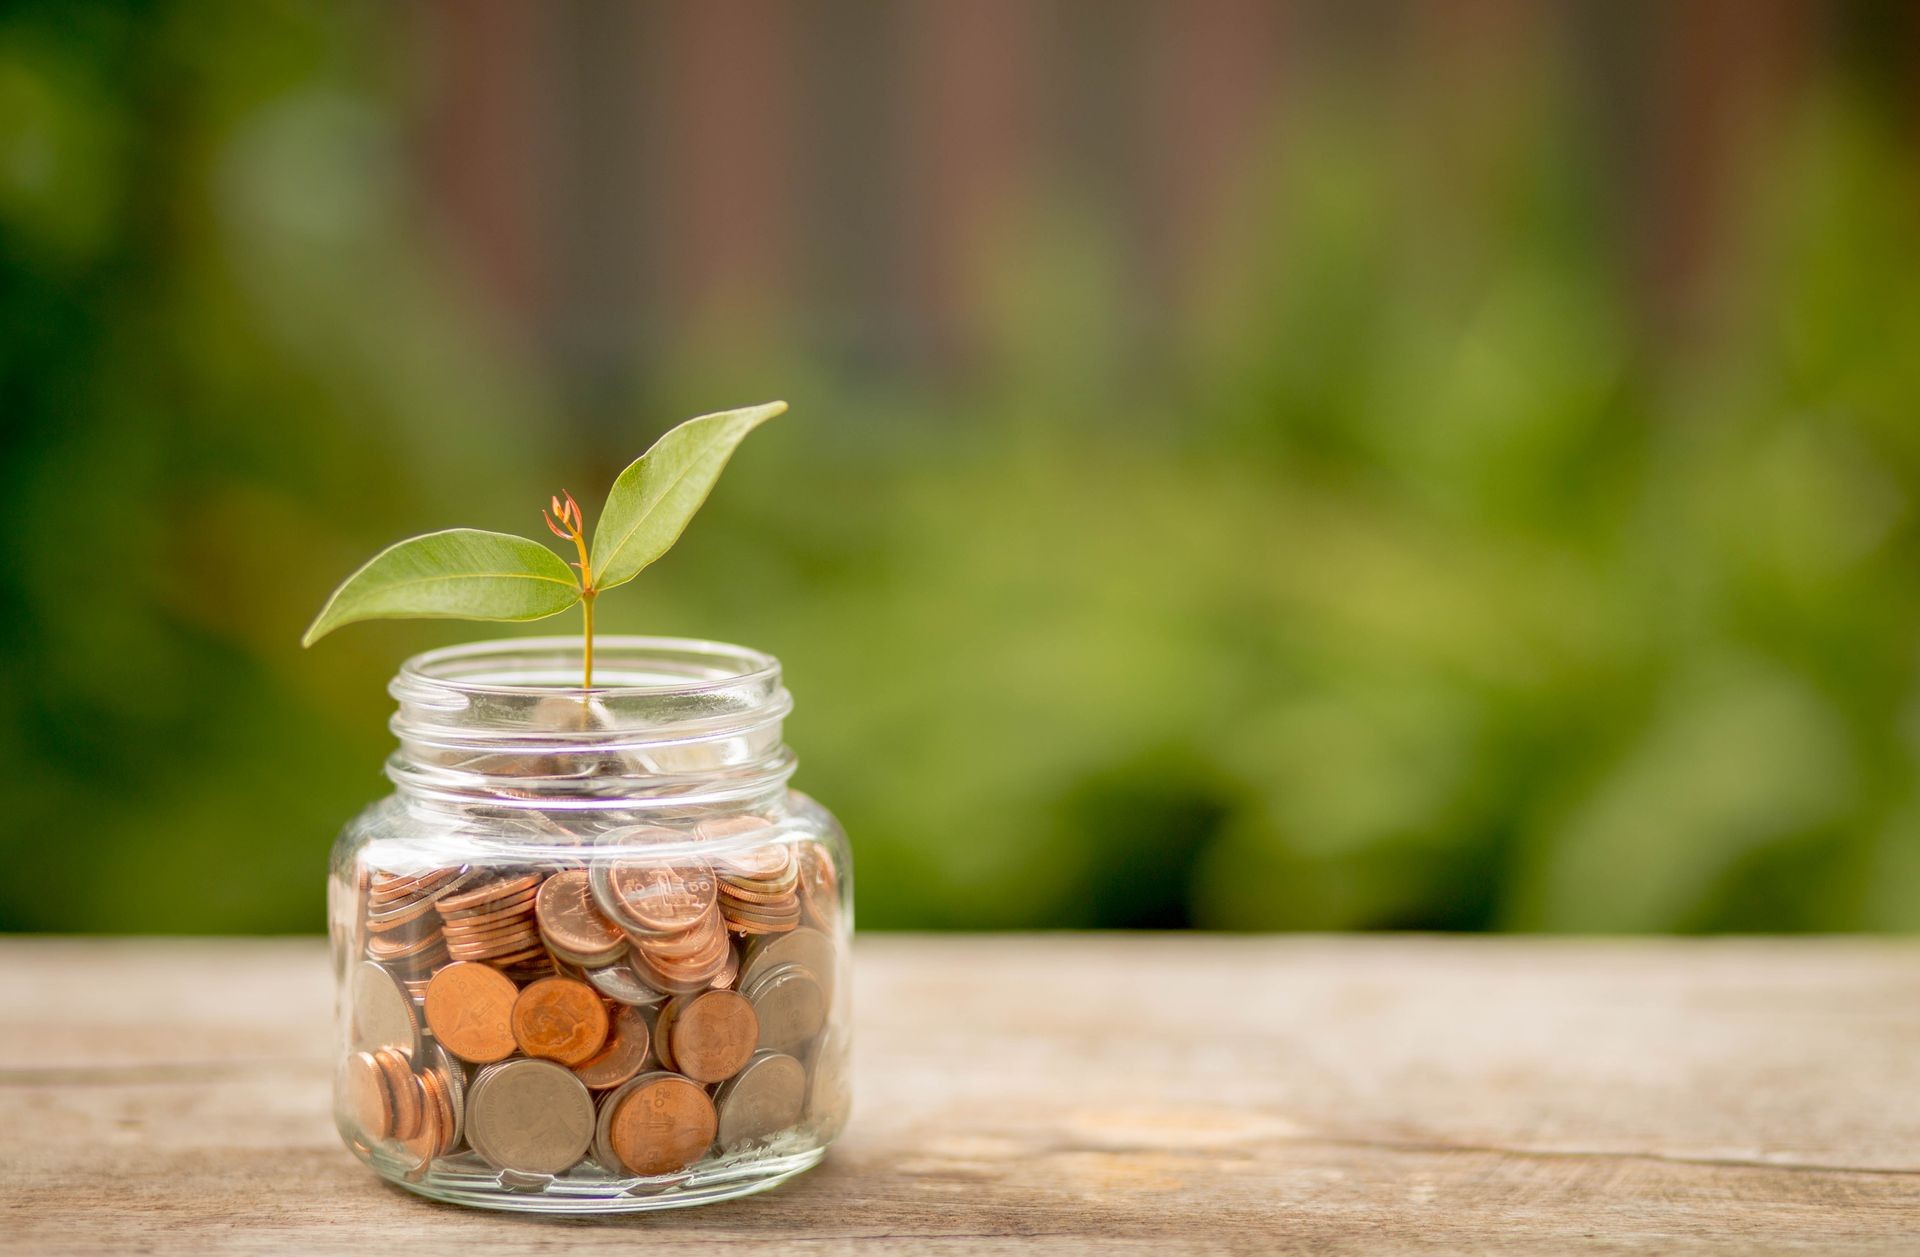 Coins in jar on wooden table blurred nature background.Plant Growing in saving Coins-Investment and Interest concept.